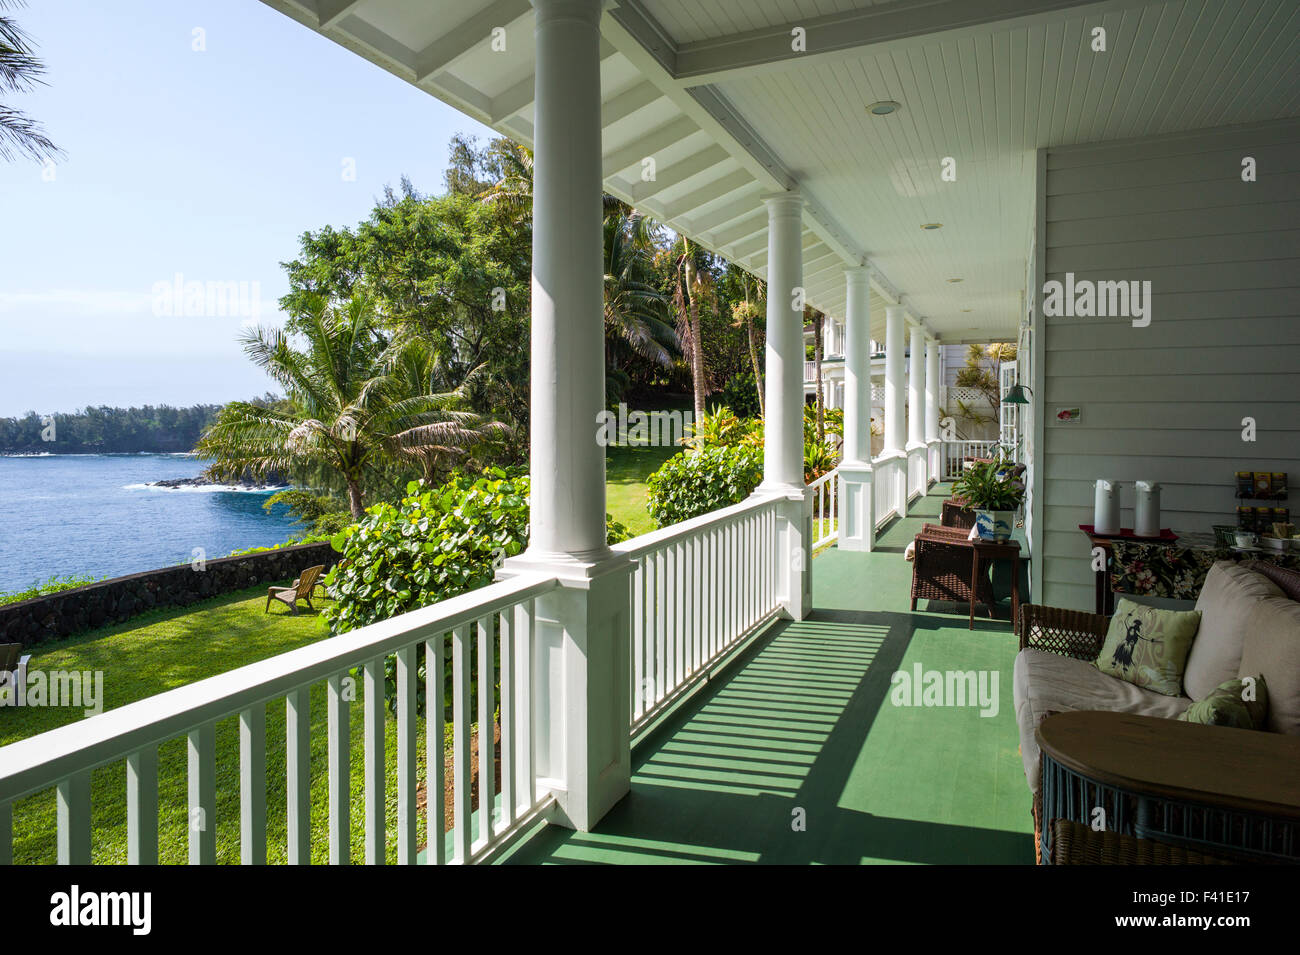 Porch view of Pacific Ocean from The Palms Cliff House inn, Honomu, The Big Island of Hawai'i, Hawaii, USA Stock Photo